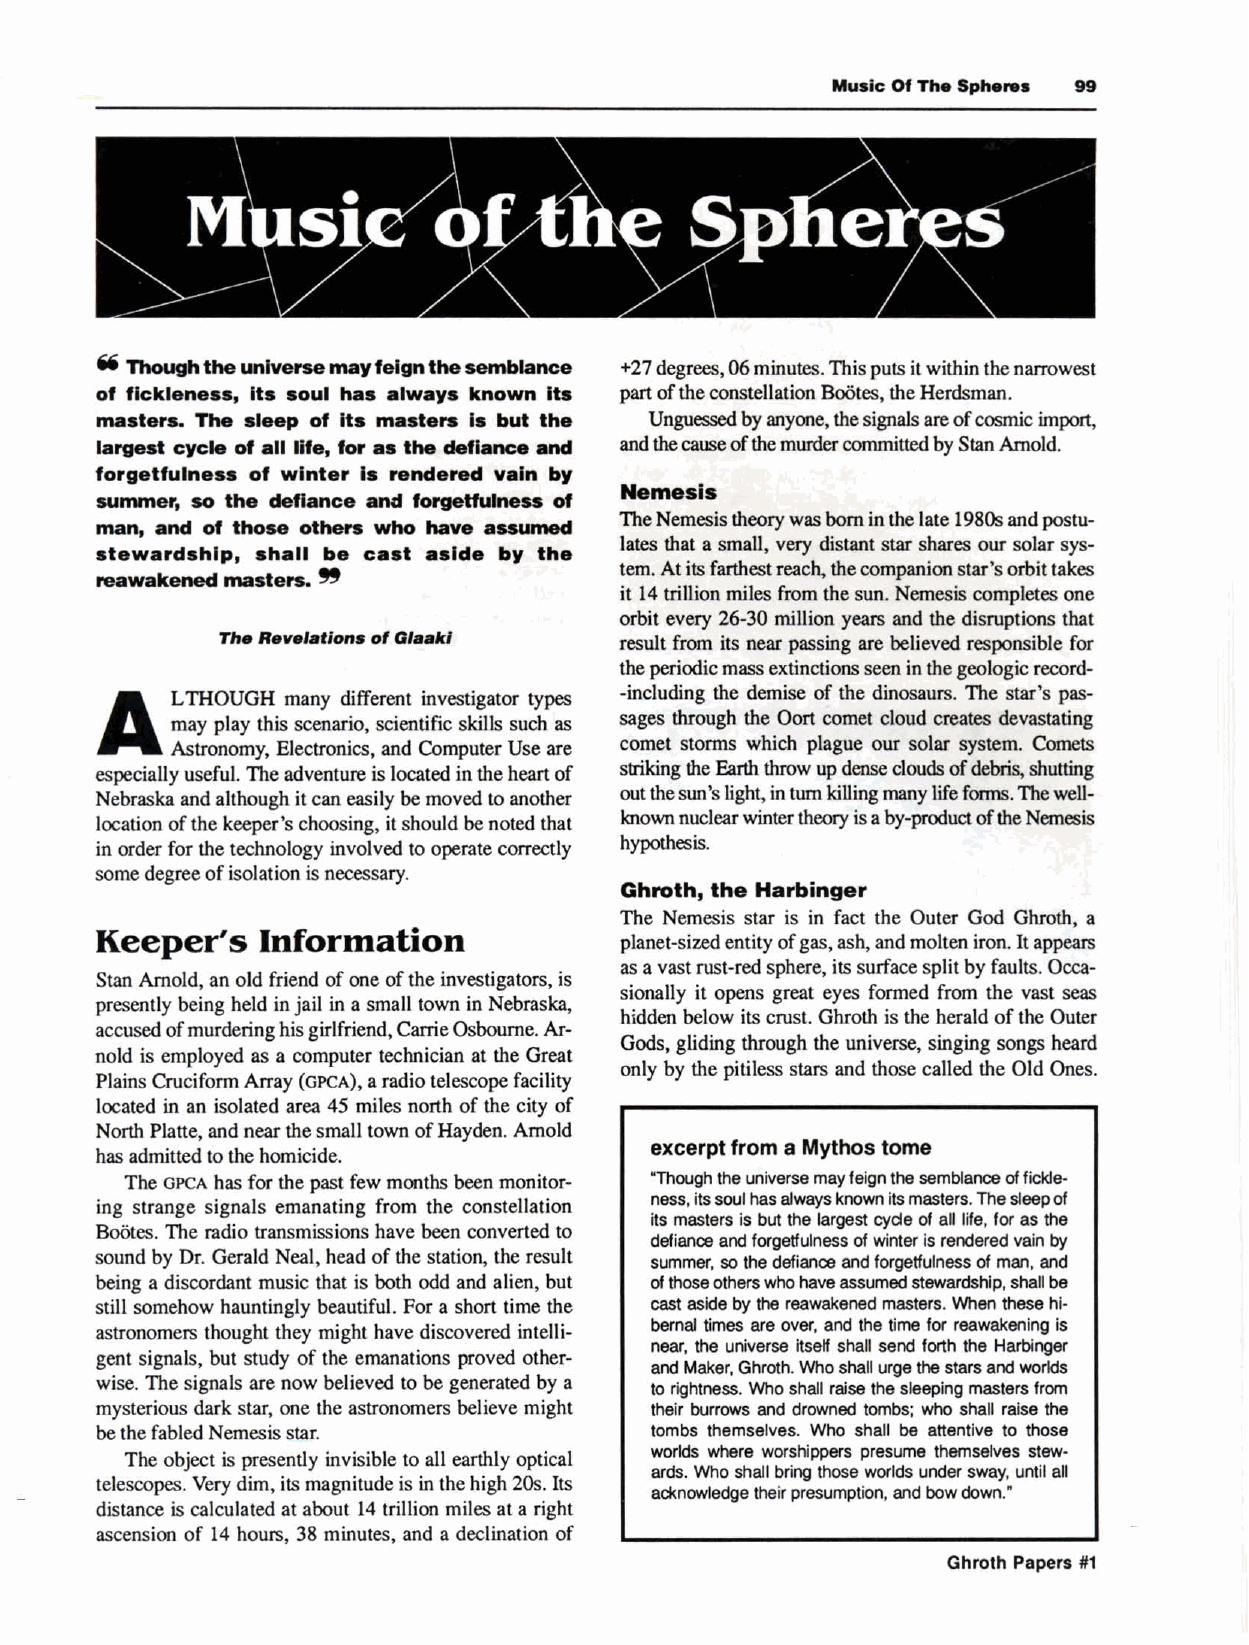 CoC Music of the Spheres